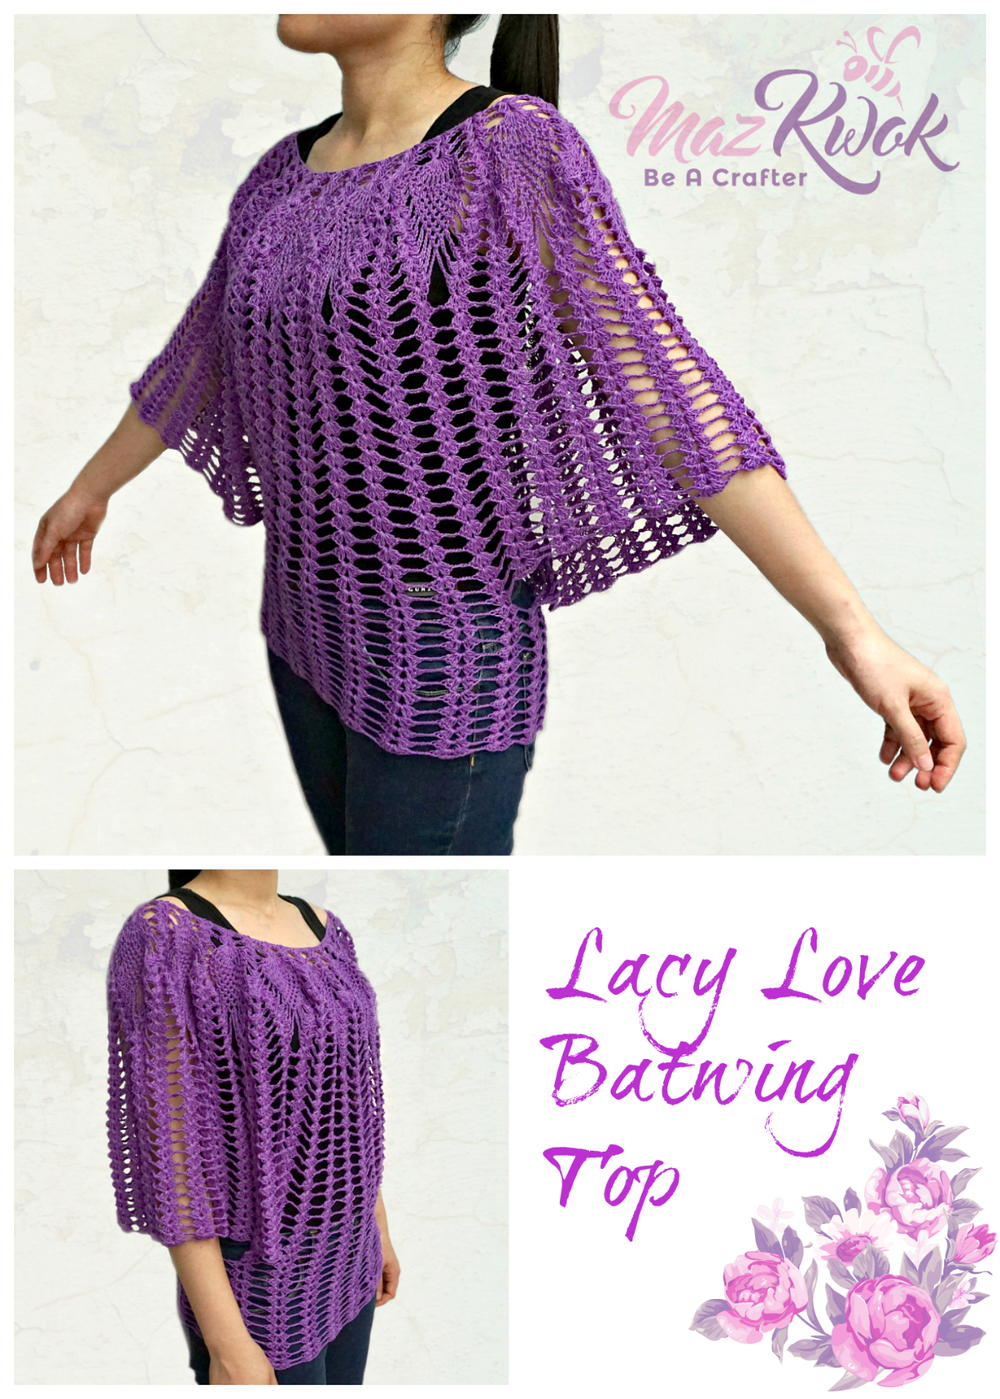 Love lacy LOVE AFTER